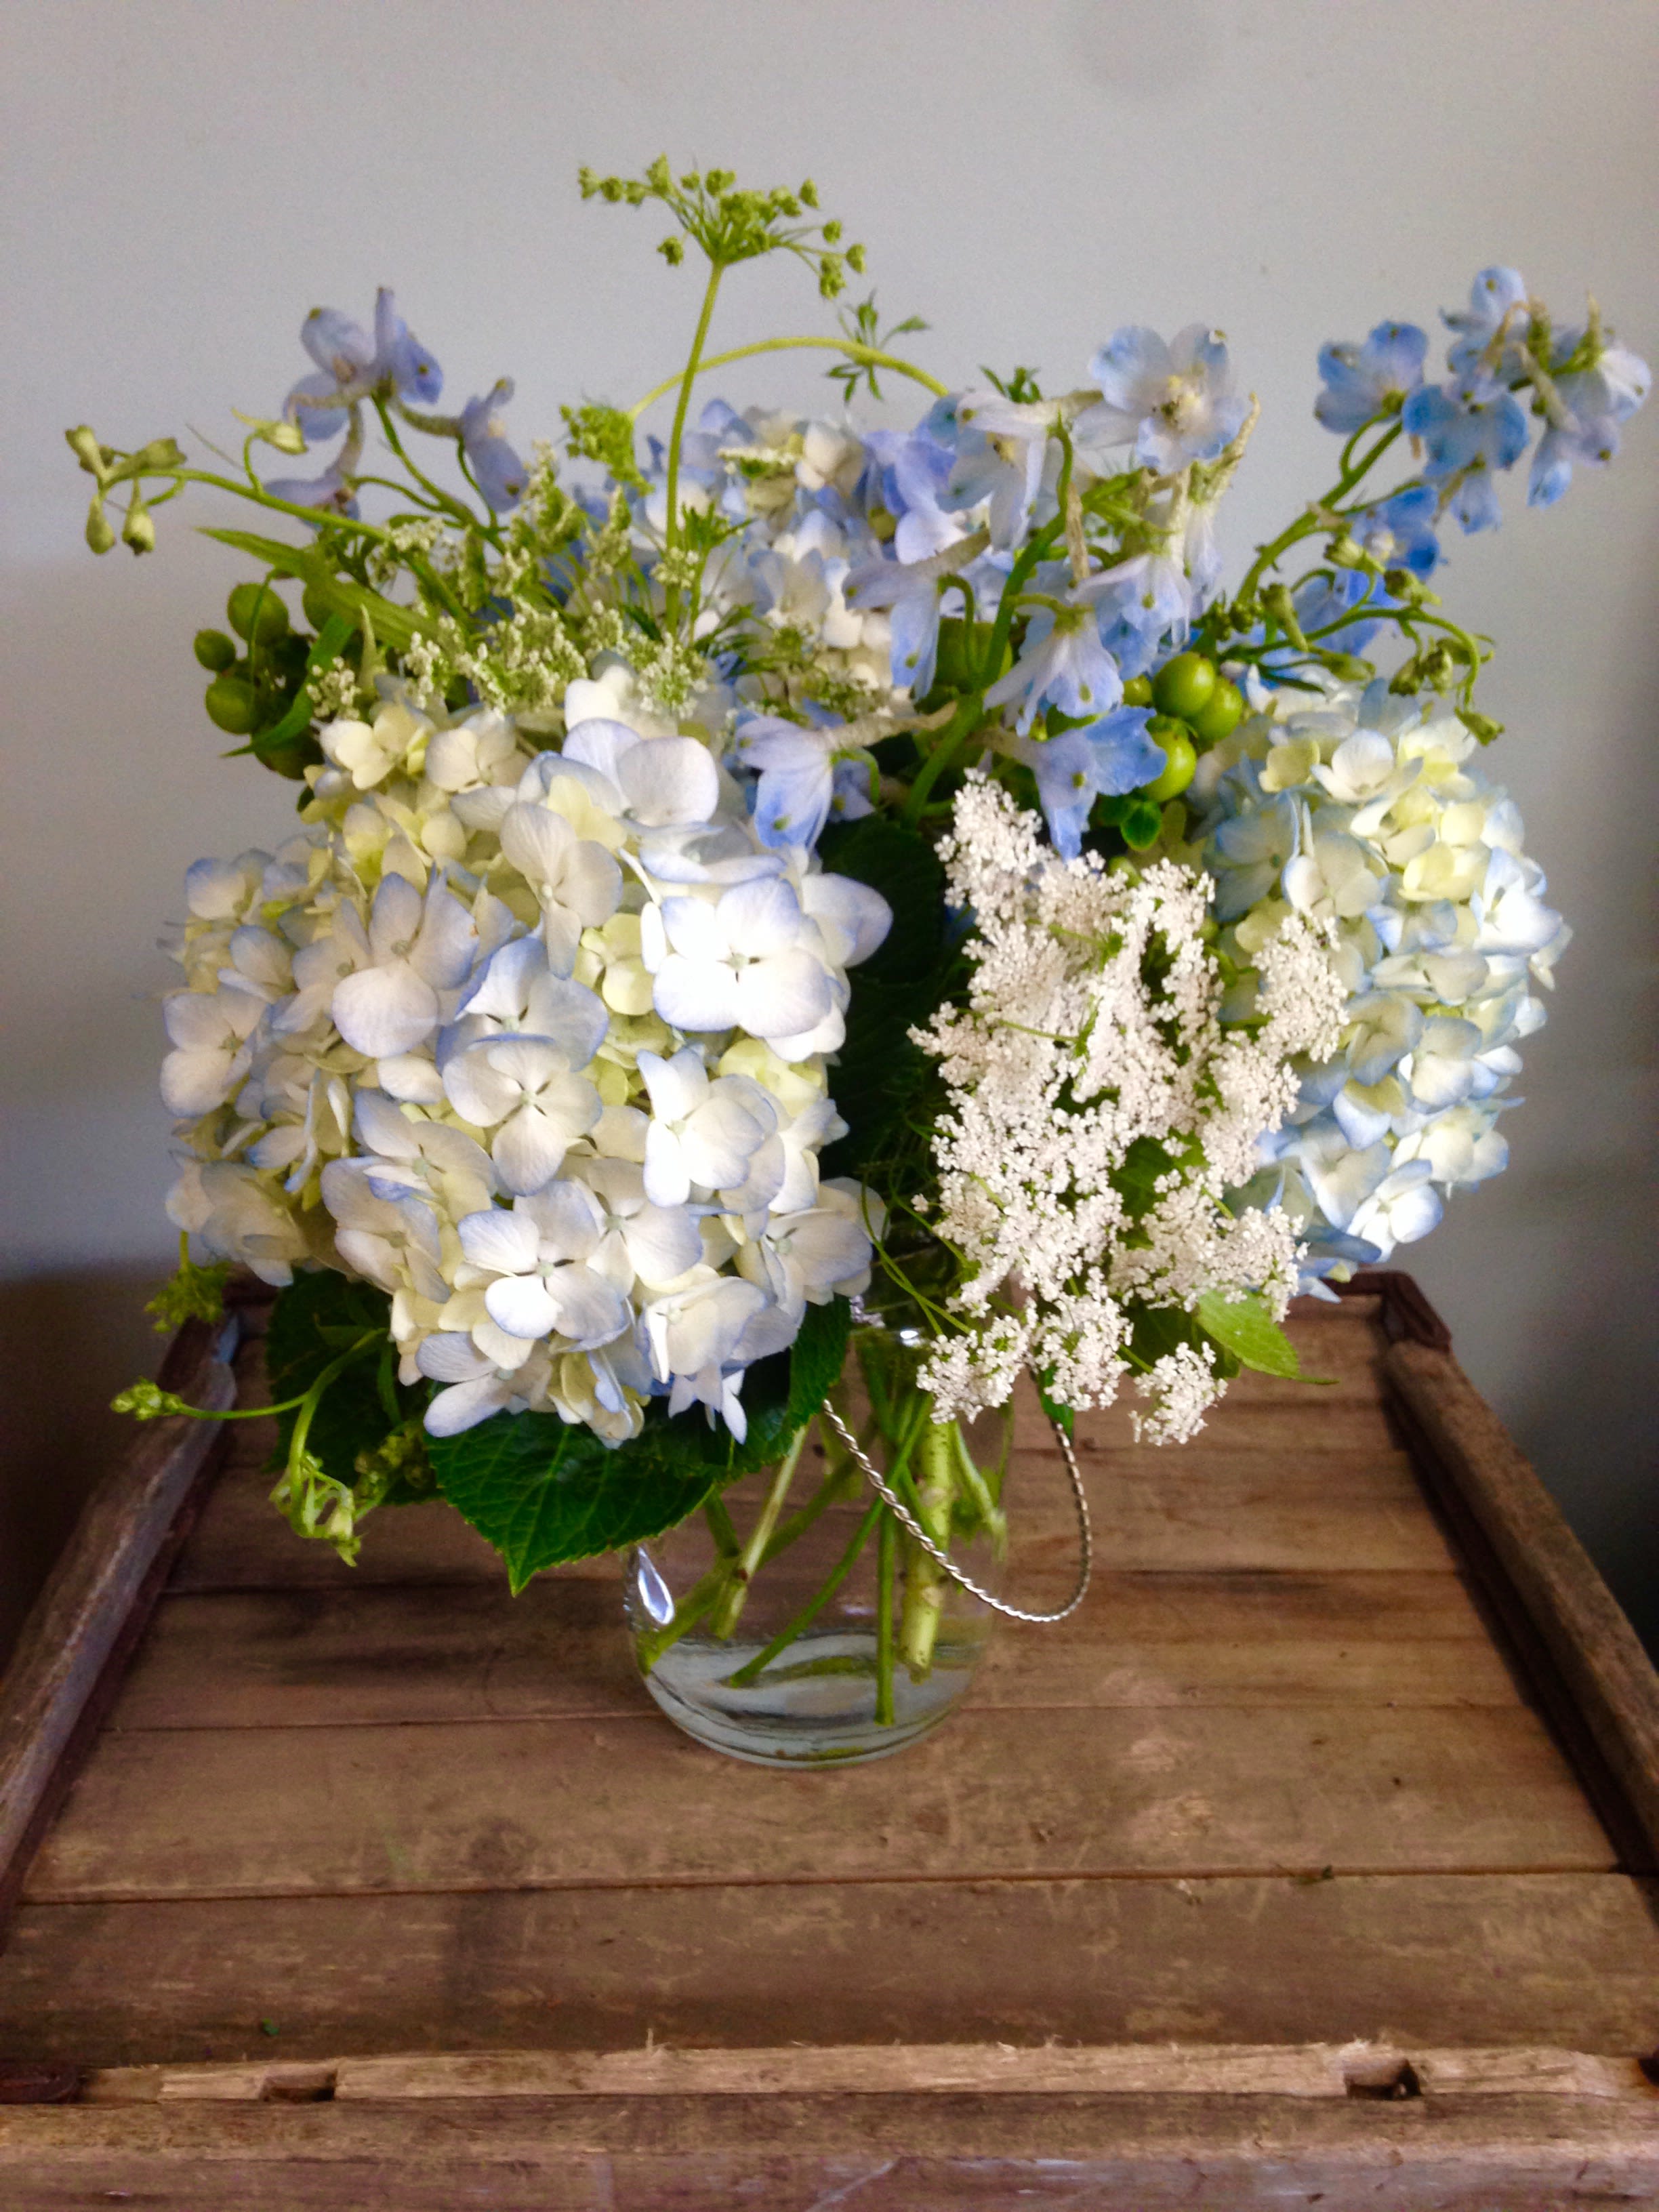 Cape Cod Summer - Celebrate Summer in New England with this cool blue arrangement that'll make you feel like you're on the Cape! Arranged loosely in a glass mason jar with a metal handle. 